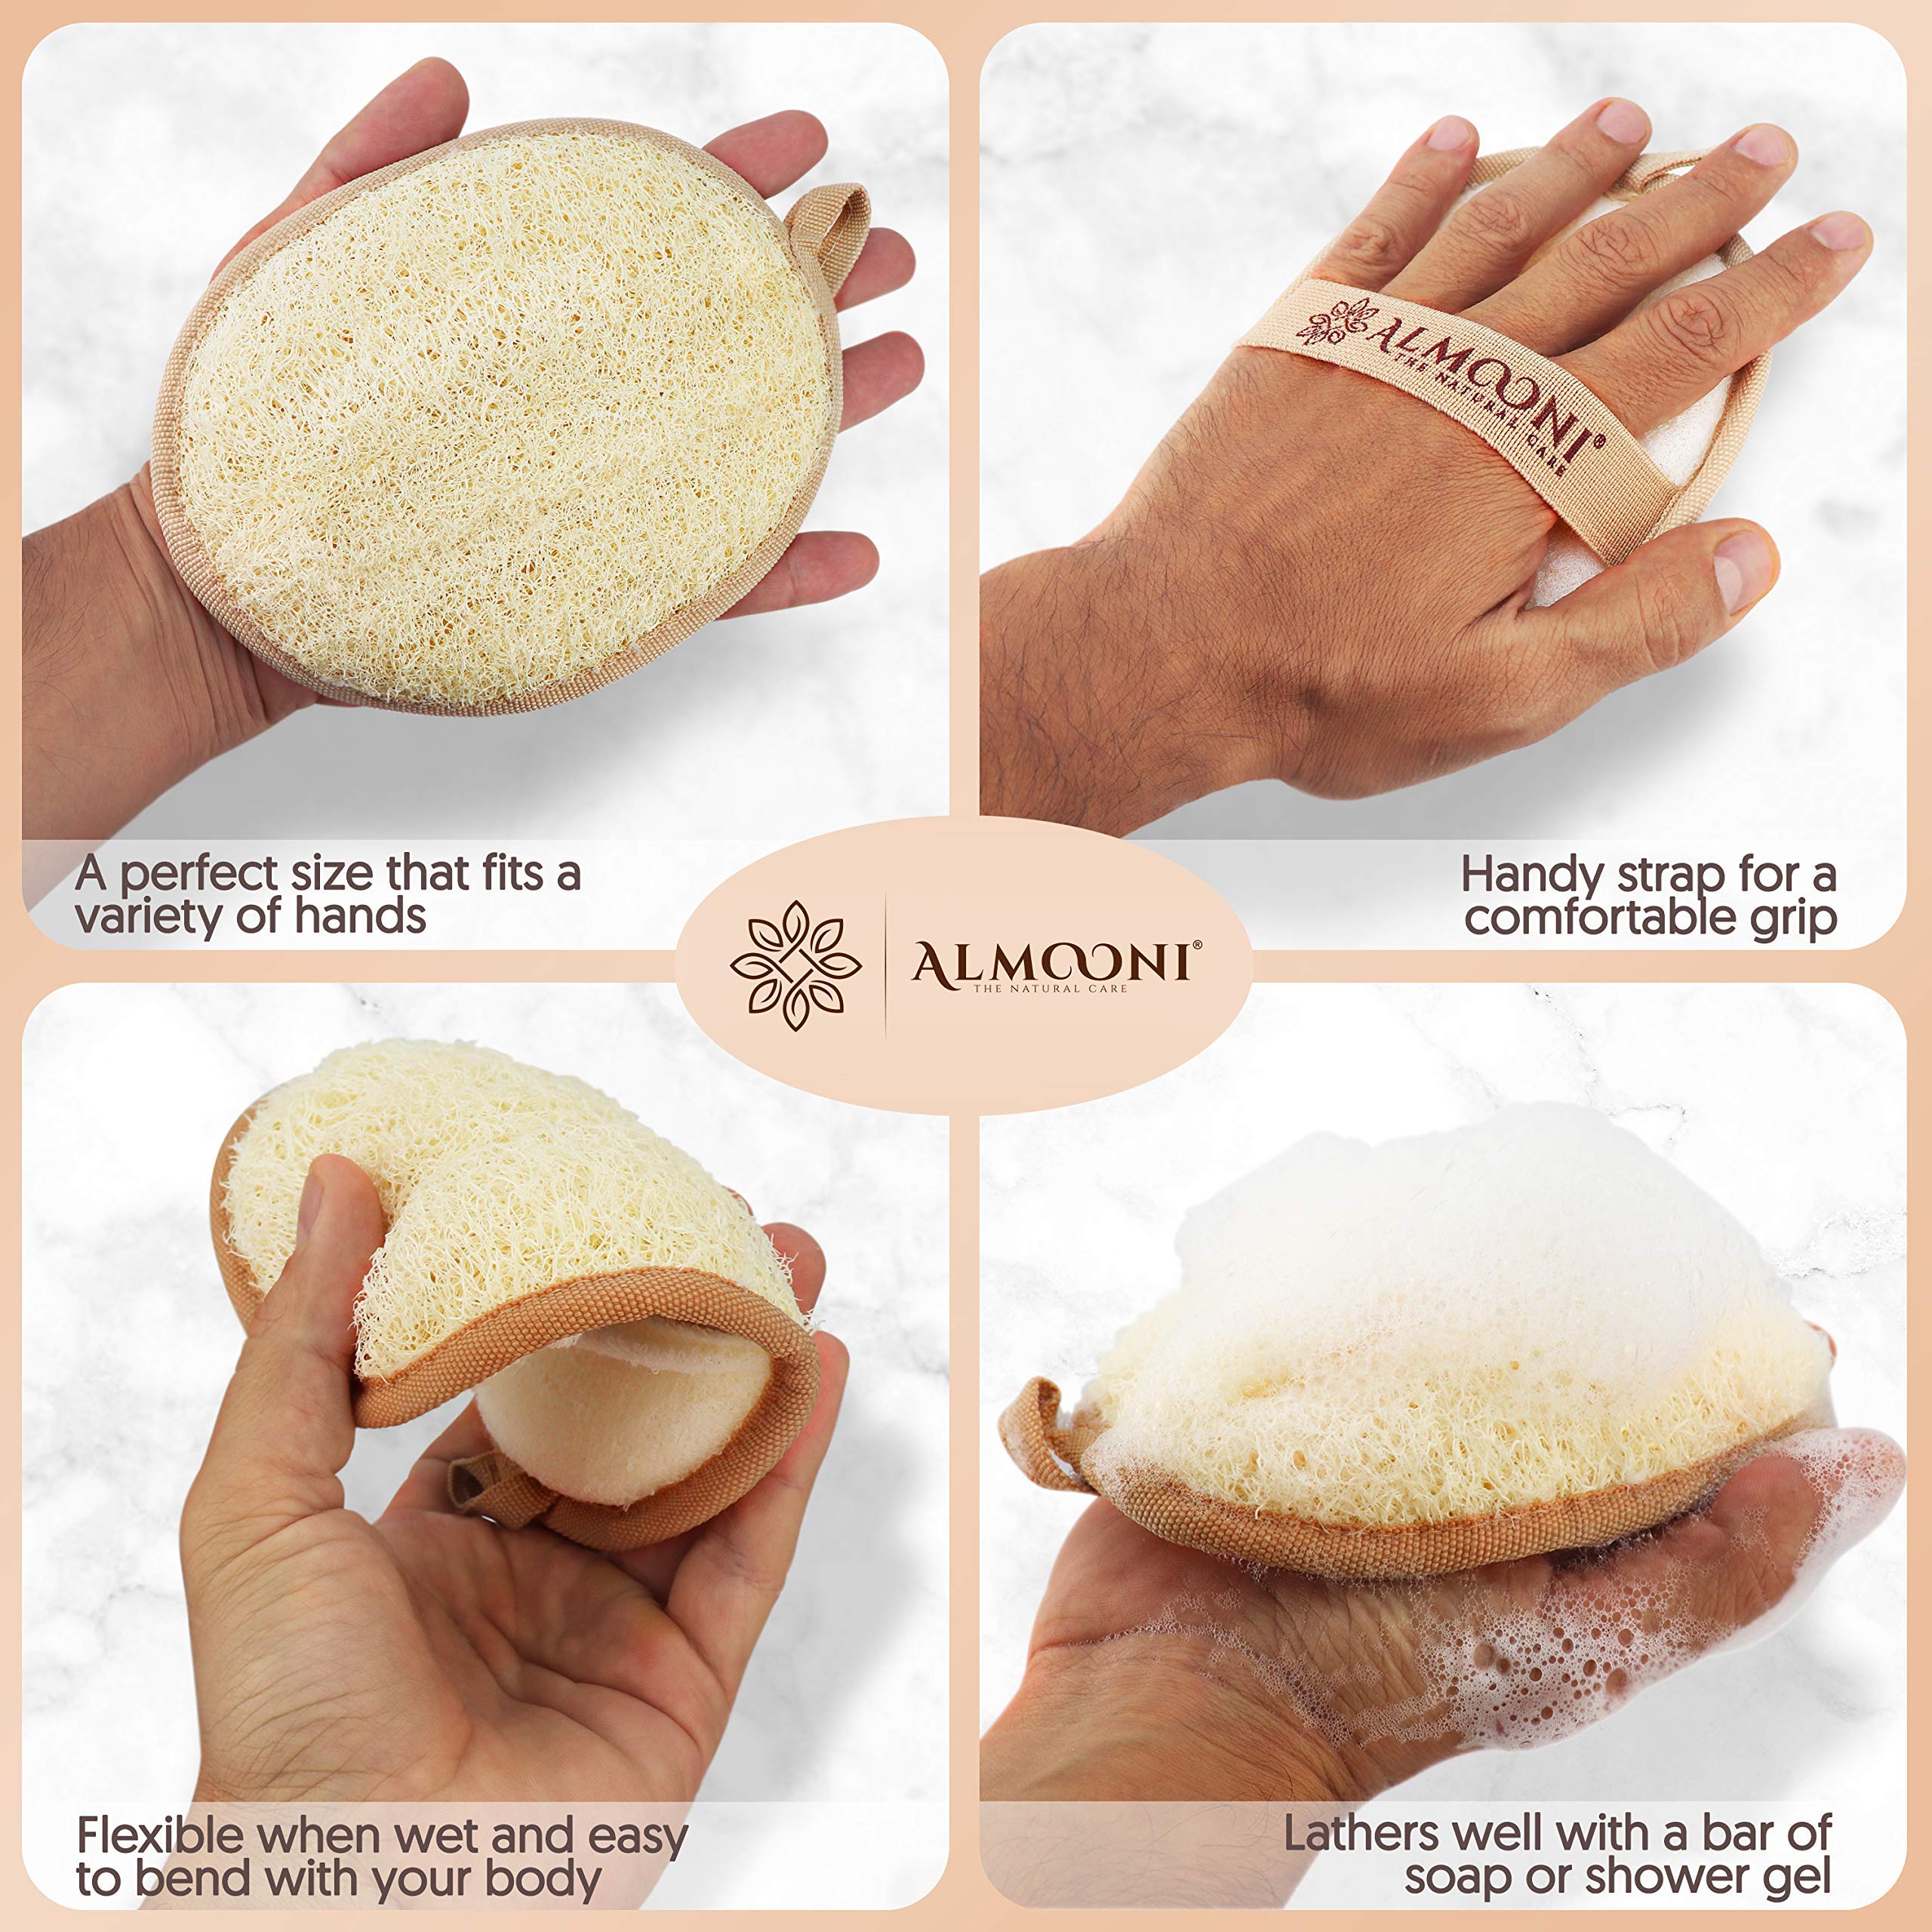 Almooni Premium Exfoliating Loofah Pad Body Scrubber, Made with Natural Egyptian Shower loofa Sponge That Gets You Clean, Not Just Spreading Soap - 2 Count(1 Pack)